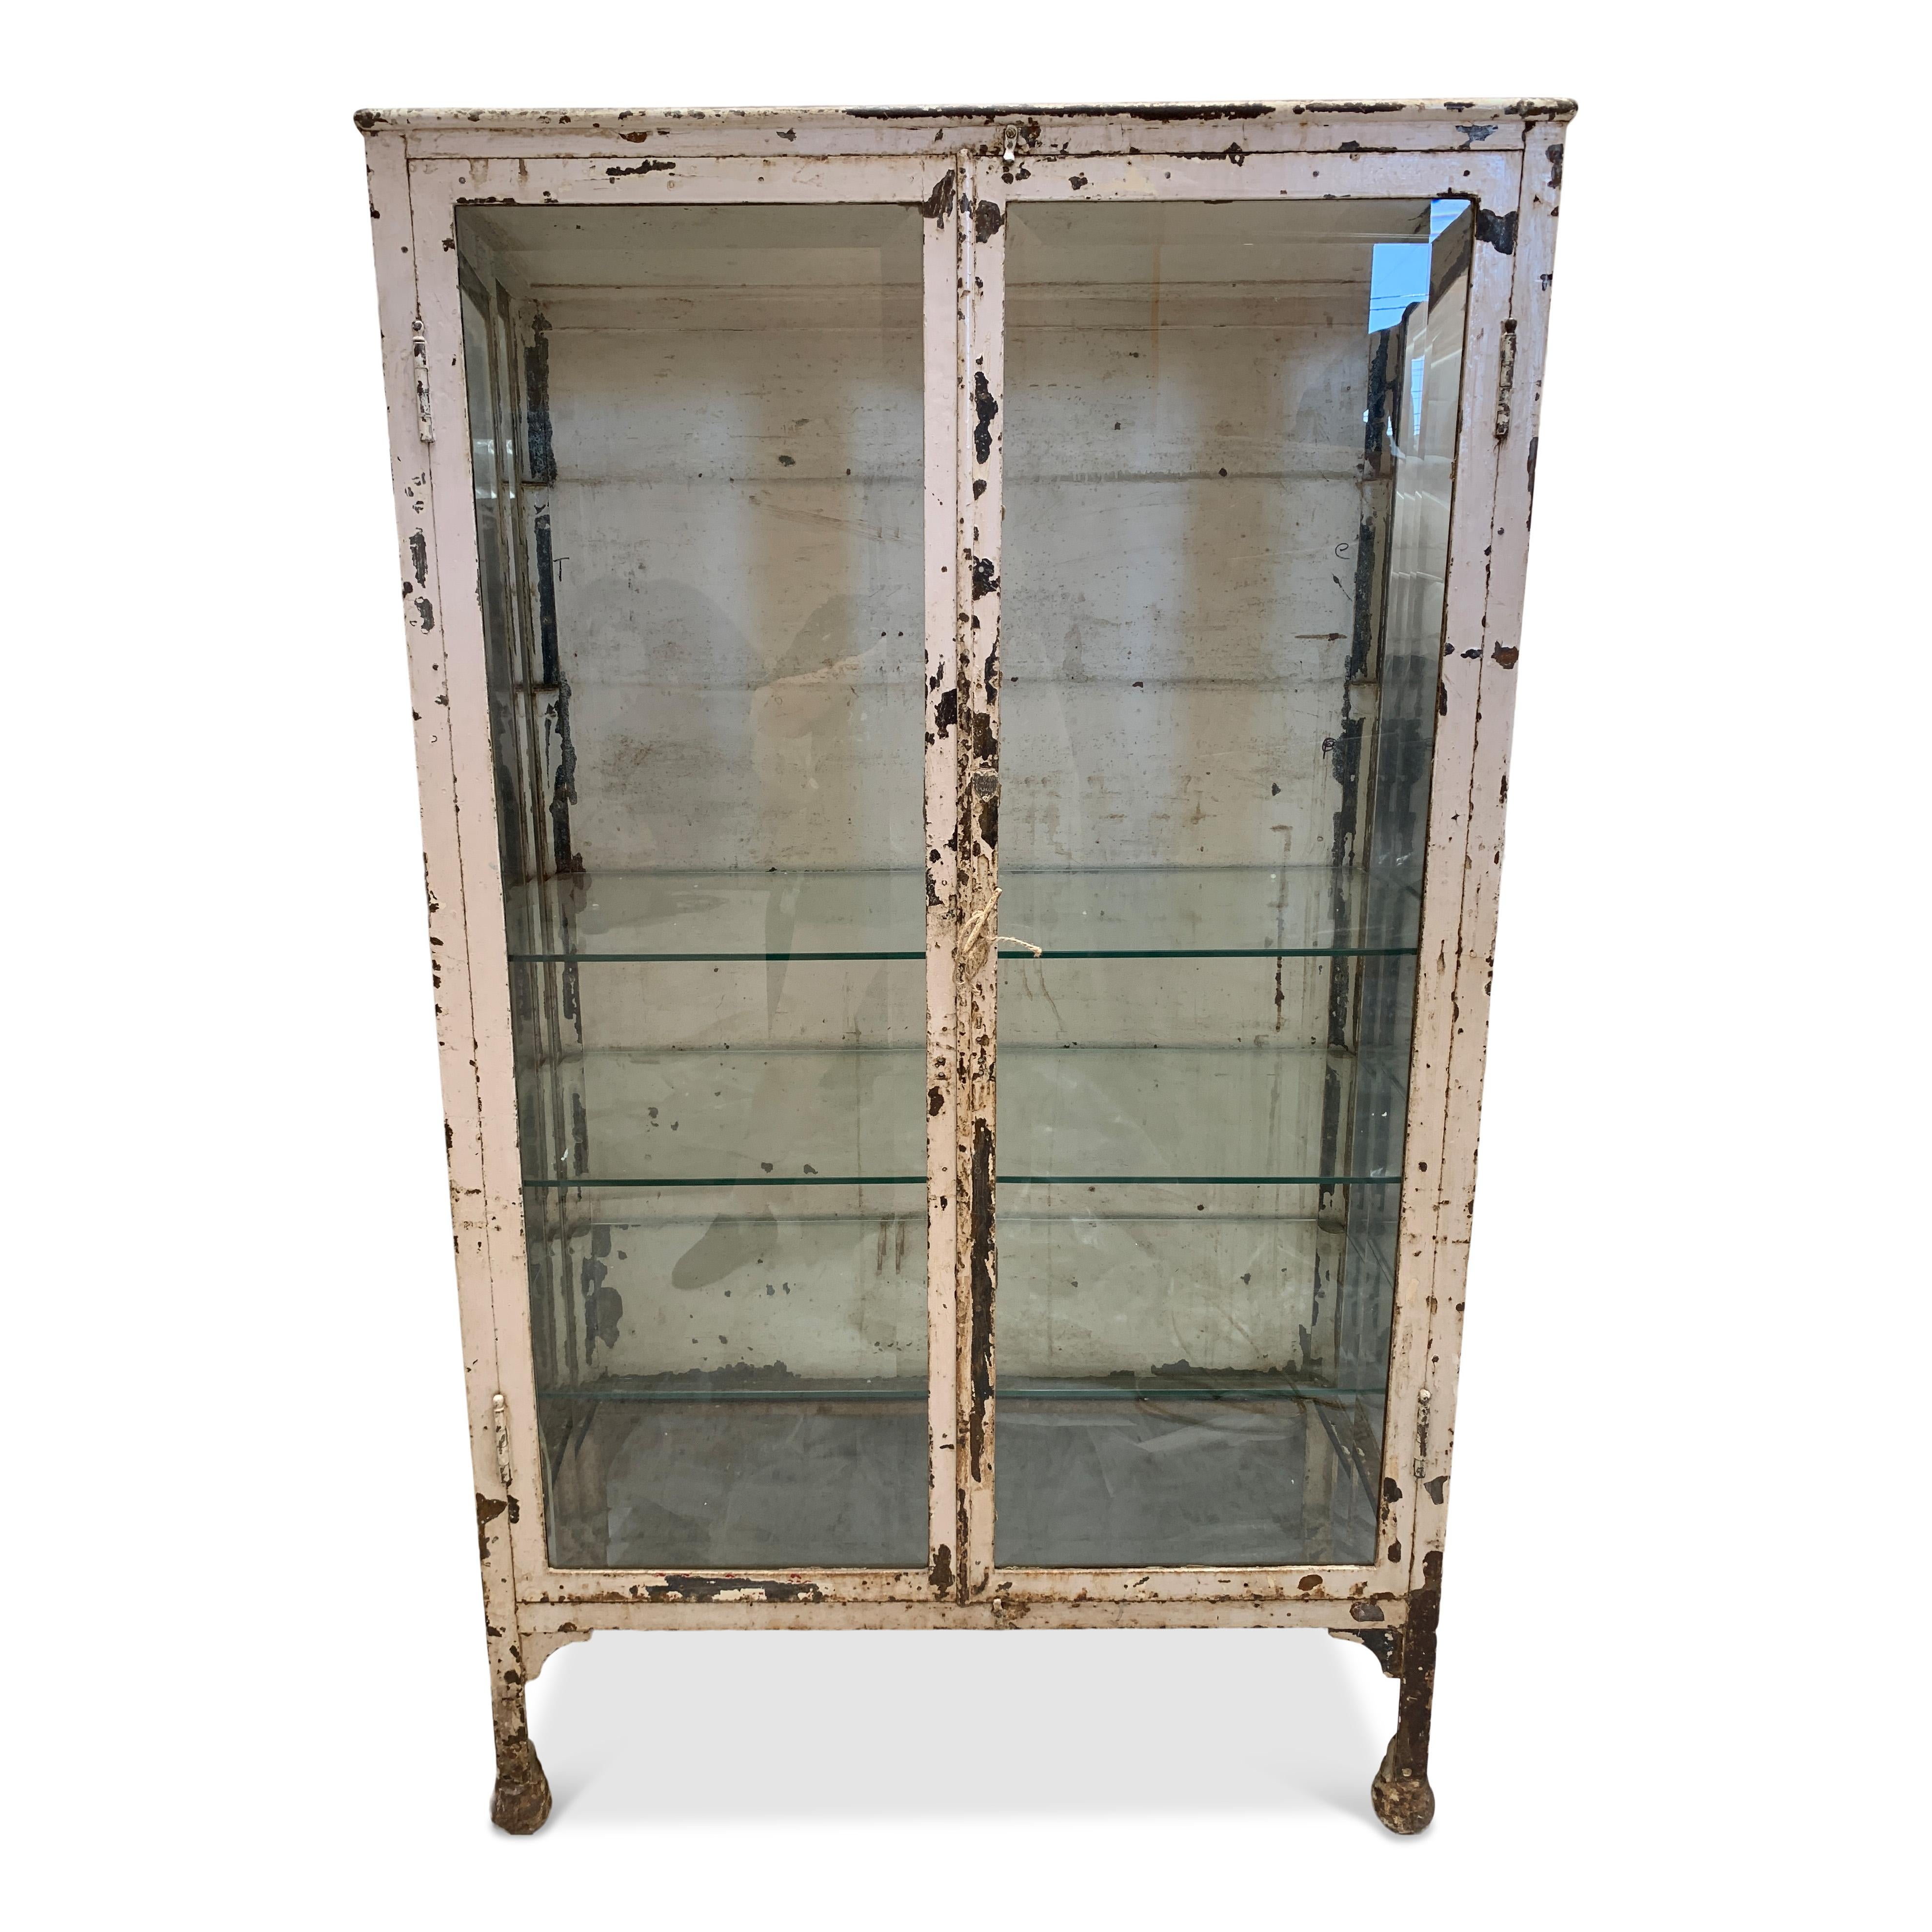 A stunning vintage piece will beautiful detailing that has only gotten better with age. The rustic wear of this cabinet gives it a beautiful vintage look while still being in wonderful working condition. This piece still has all of its original